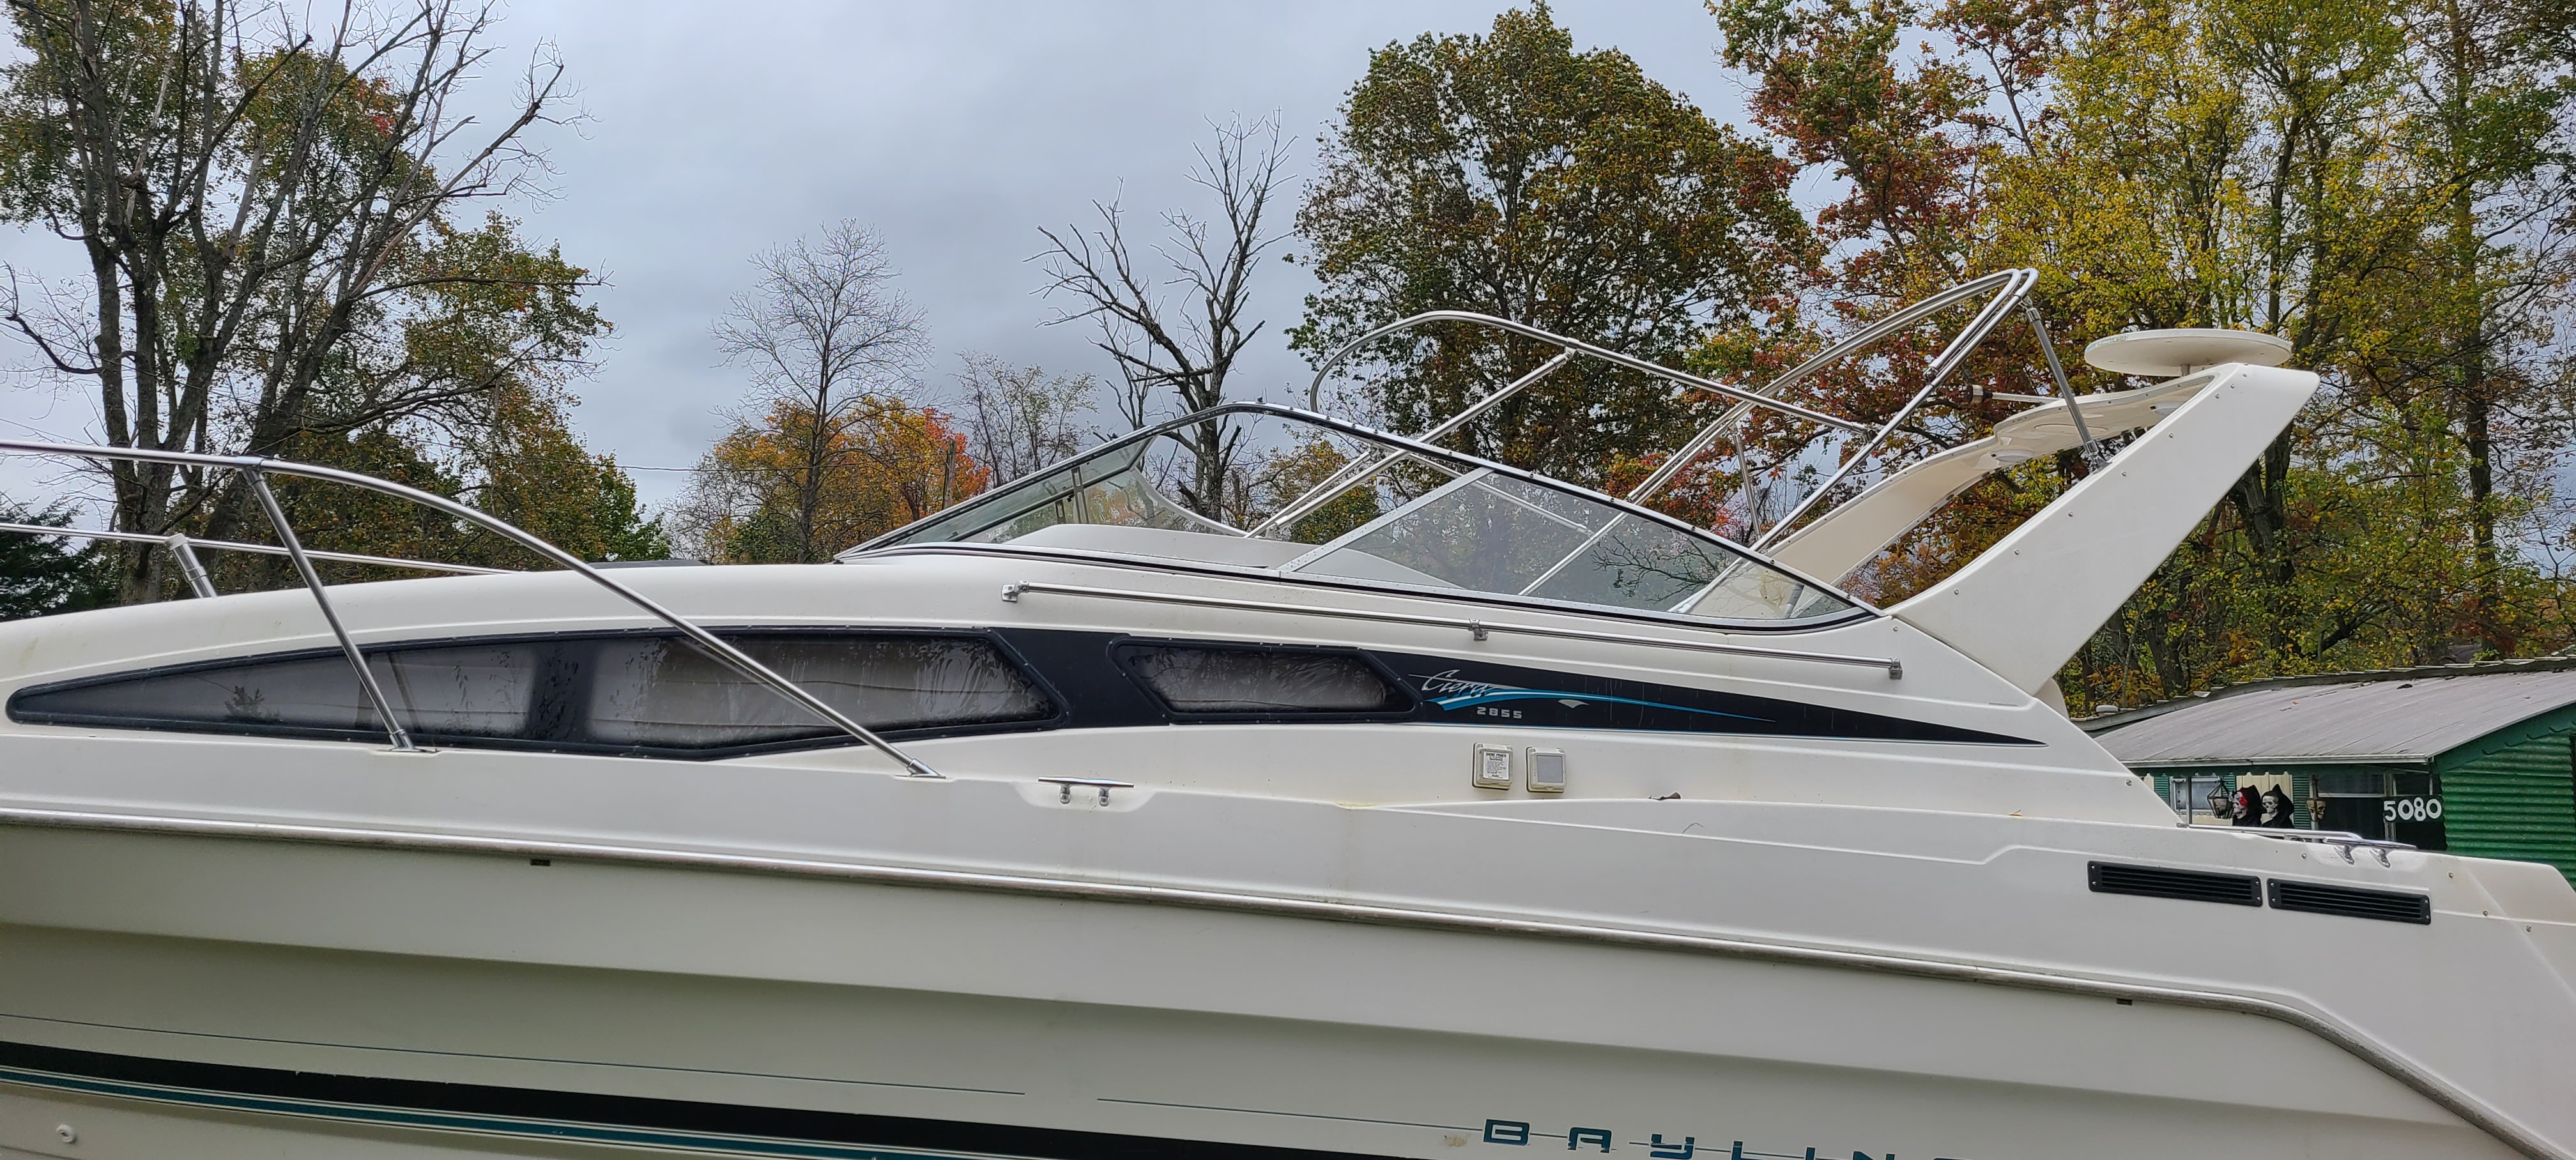 1995 Bayliner Ciera 2855 Power boat for sale in Hallam, PA - image 8 